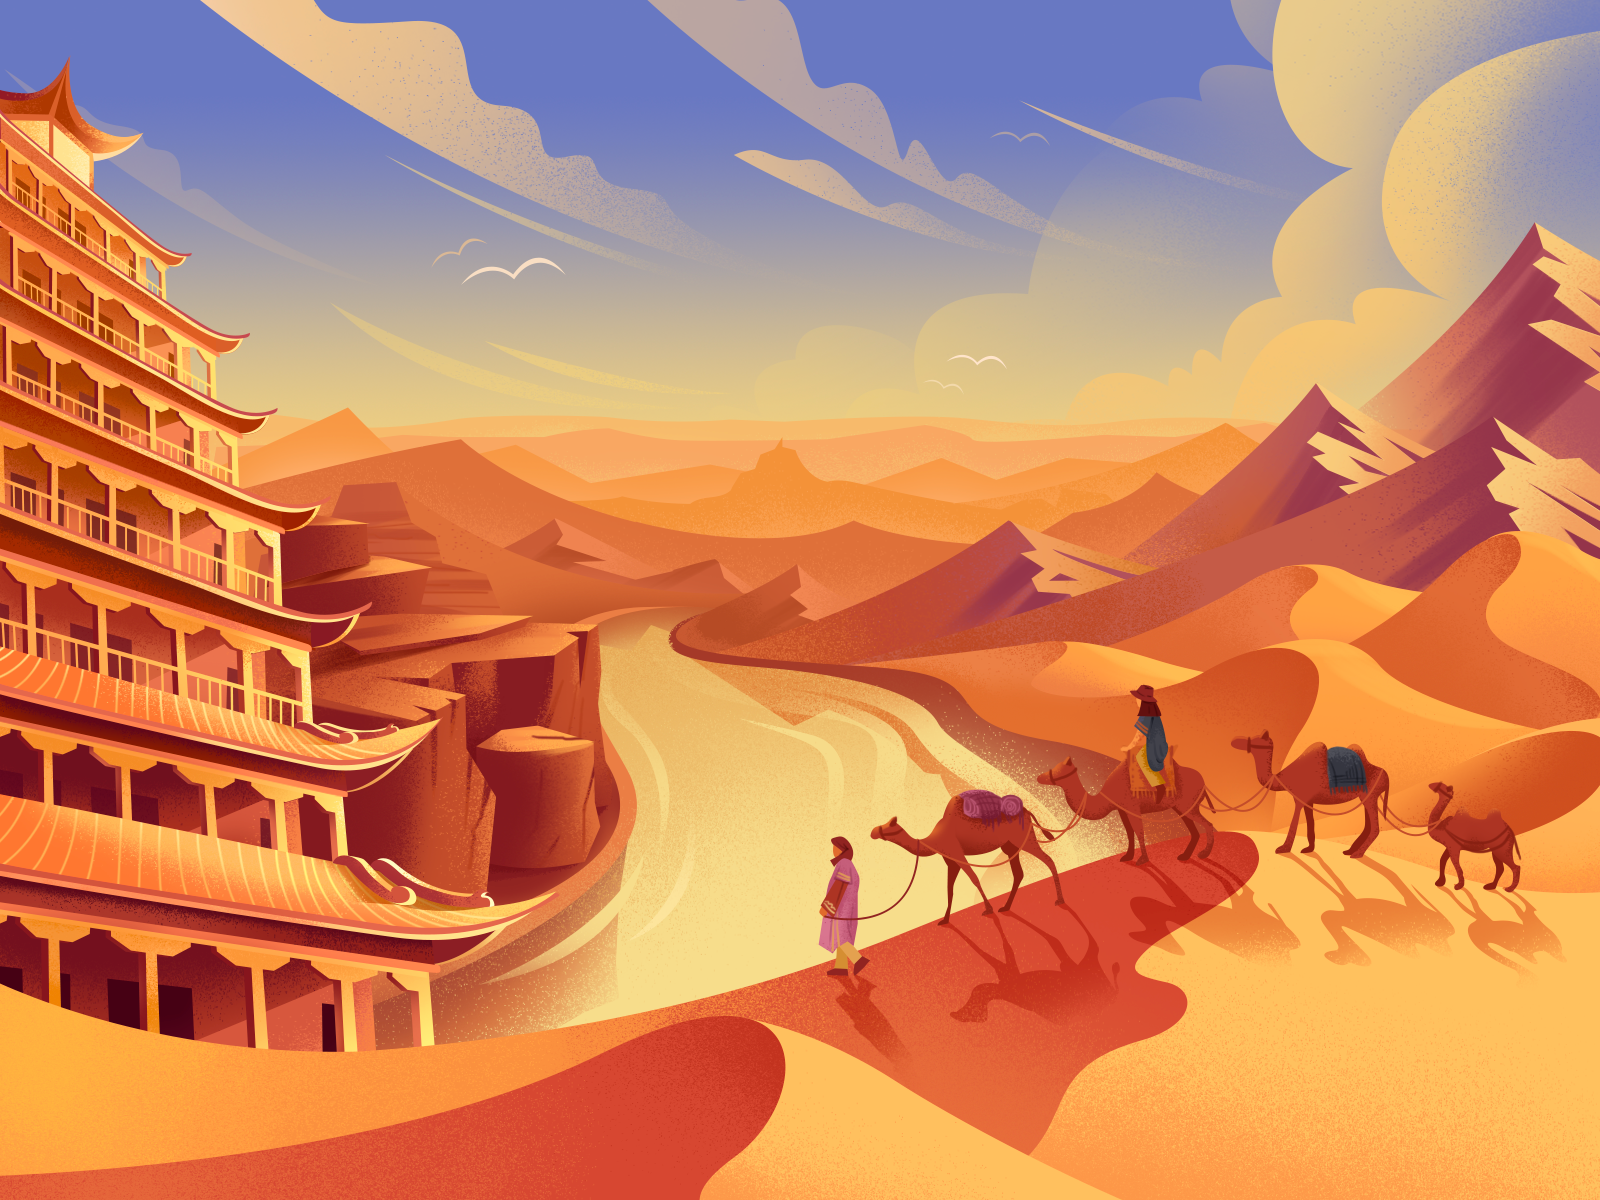 The Silk Road camel design illustration mountain people vector